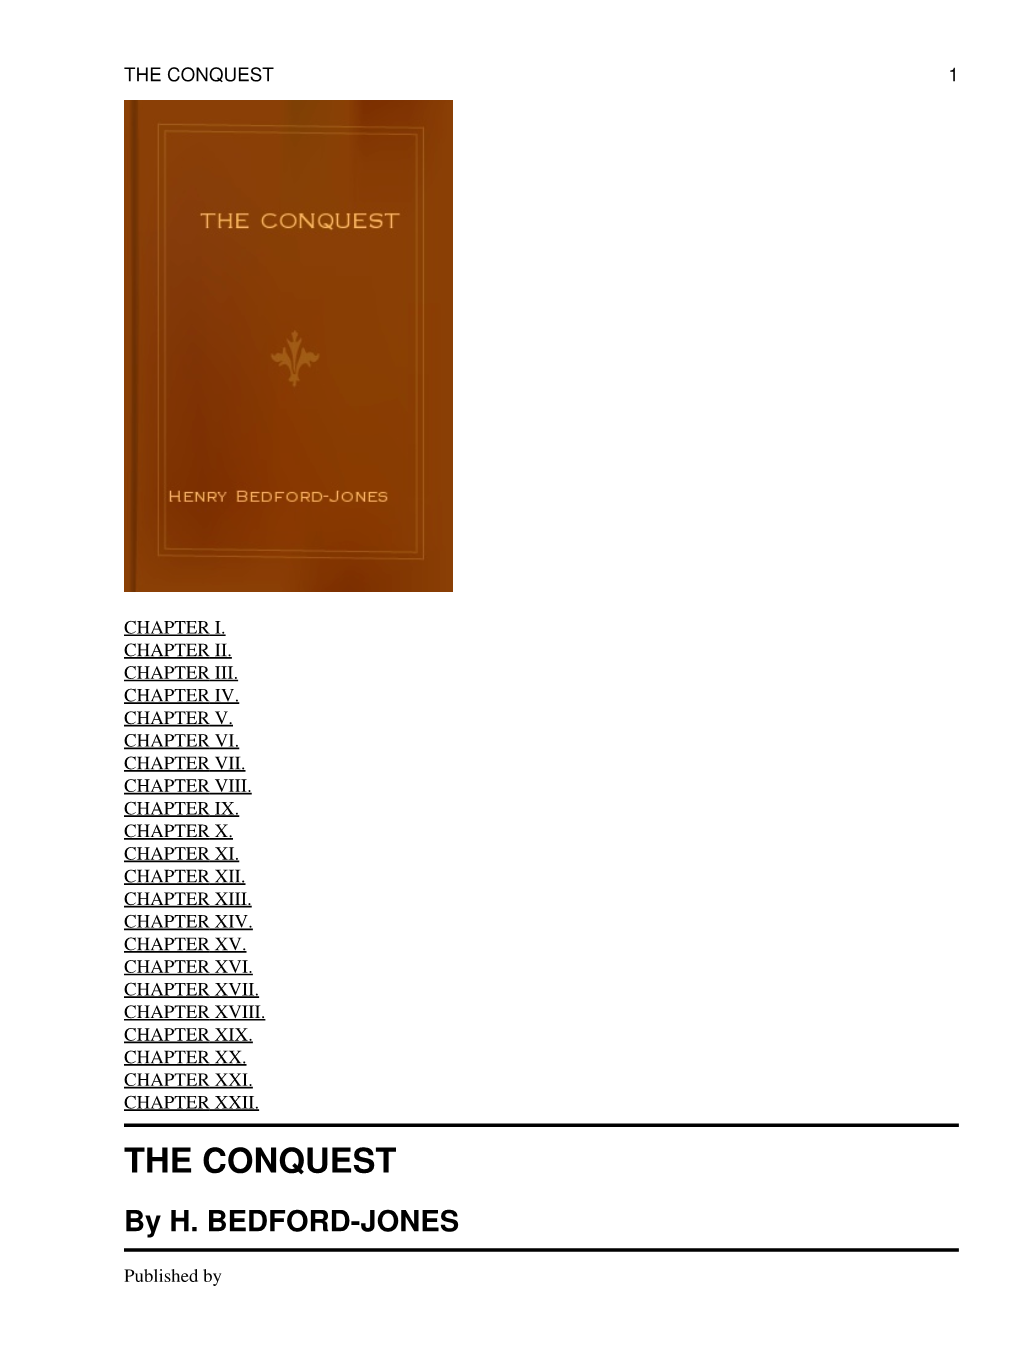 THE CONQUEST by H. BEDFORD-JONES